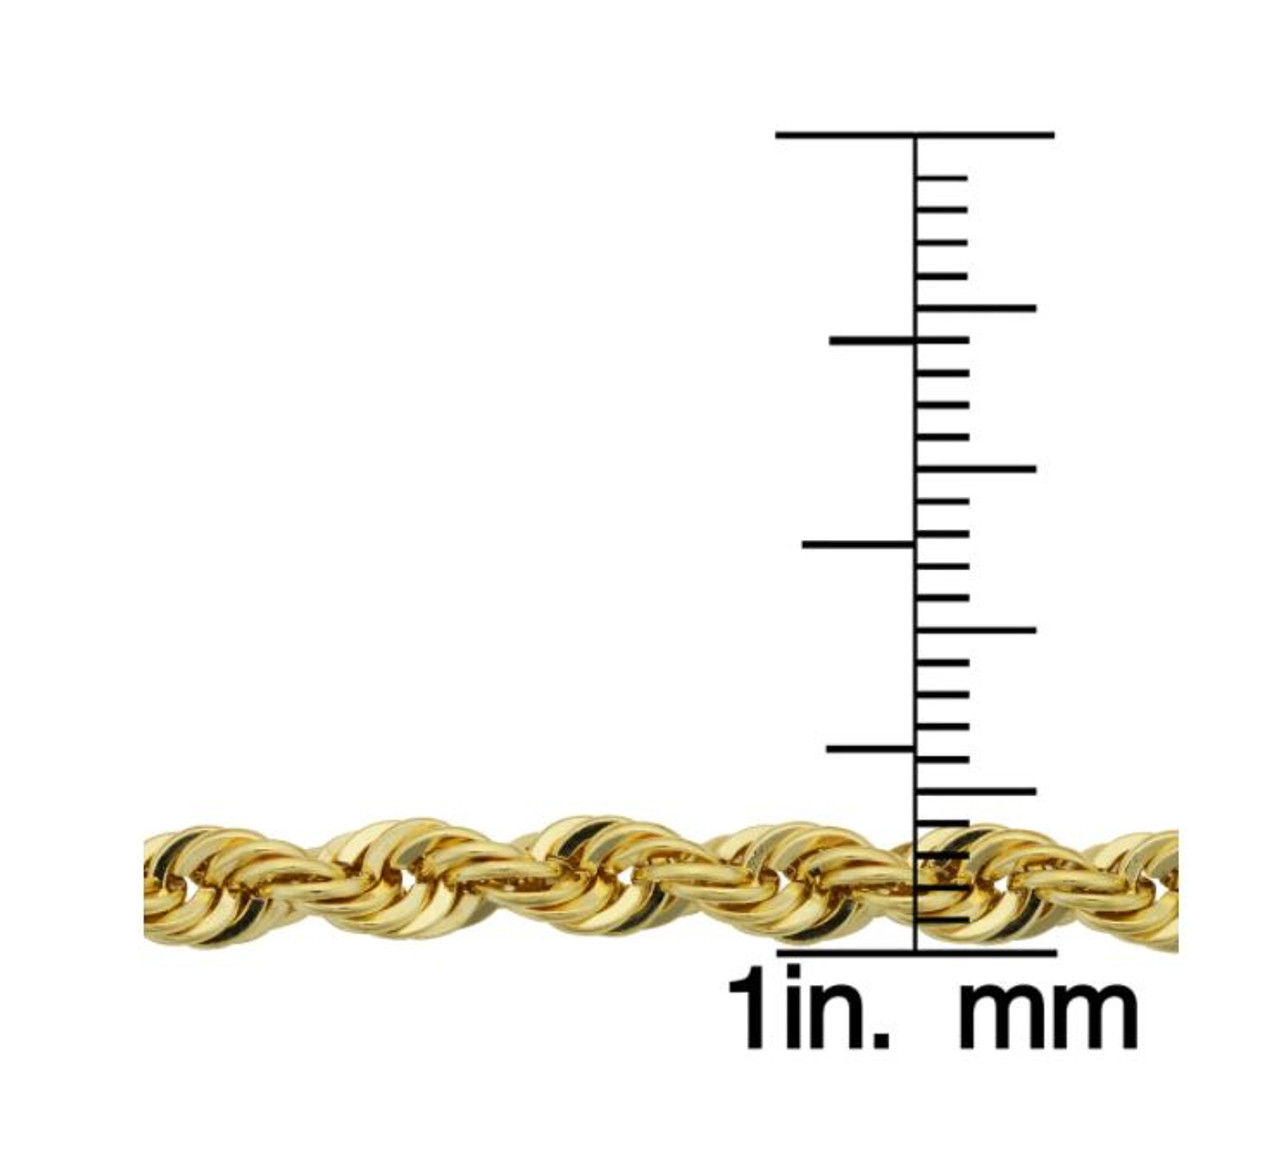 2mm Diamond Cut Rope Chain Extender Necklace Pendant Real 10K Yellow Gold